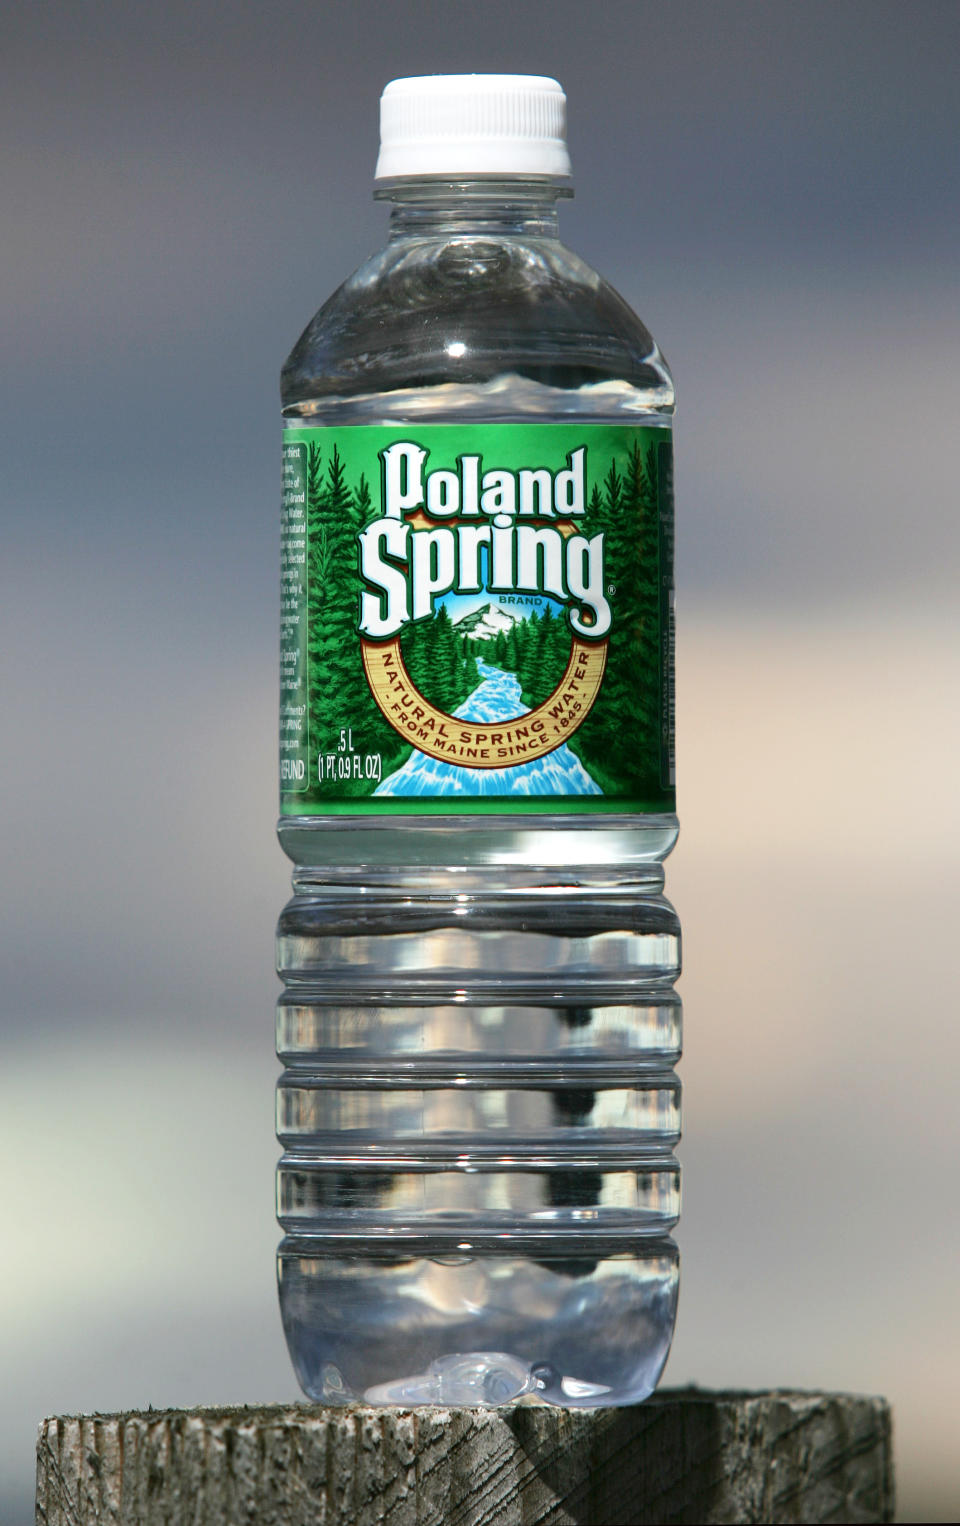 FILE - This Nov. 10, 2005, file photo shows a bottle of Poland Spring water in Fryeburg, Maine. Global food giant Nestle is selling its North American bottled-water brands for $4.3 billion to a pair of private-equity firms that hope to reinvigorate sales. Brands including Poland Spring, Deer Park, Arrowhead and Pure Life will be sold to a subsidiary of One Rock Capital Partners in partnership with Metropoulos & Co. The deal is expected to close in spring 2021. (AP Photo/Robert F. Bukaty, File)